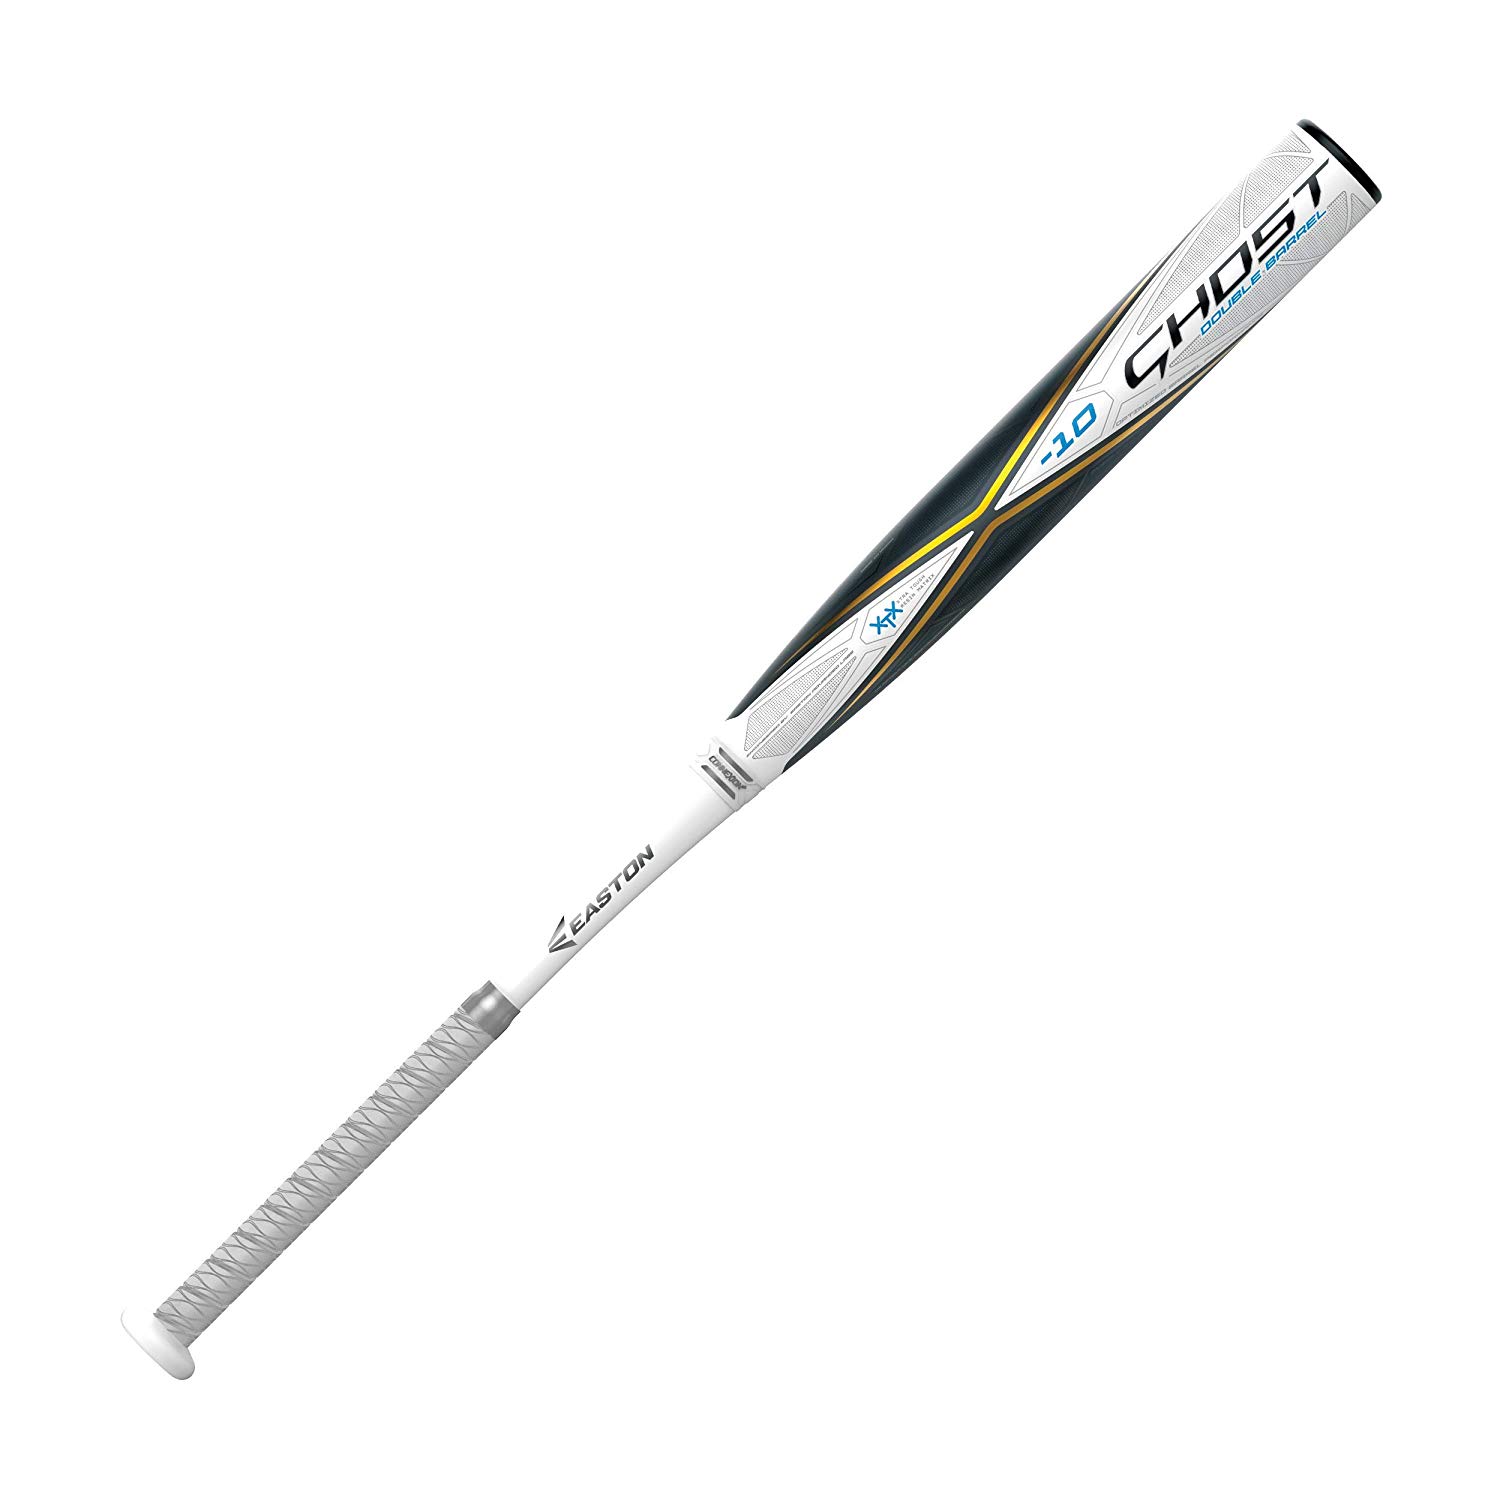 easton-ghost-10-fastpitch-softball-bat-2020-dual-stamp-34-inch-24-oz FP20GH102020-3424 Easton 628412264157 Patent-pending Double Barrel construction is the ultimate combination of feel pop